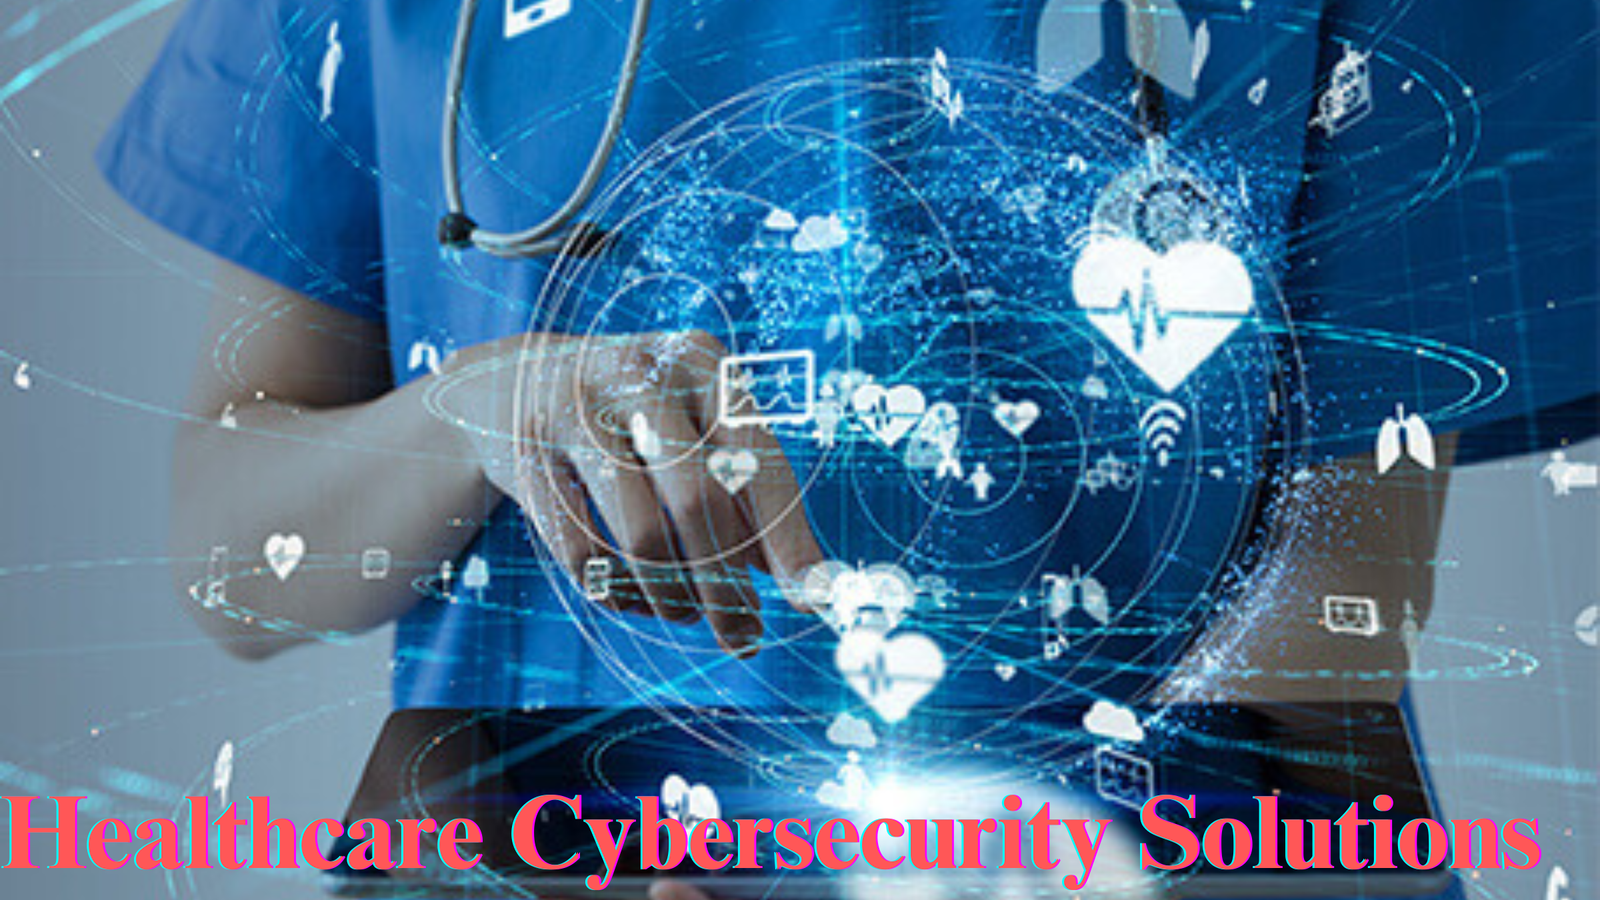 Healthcare Cybersecurity Solutions